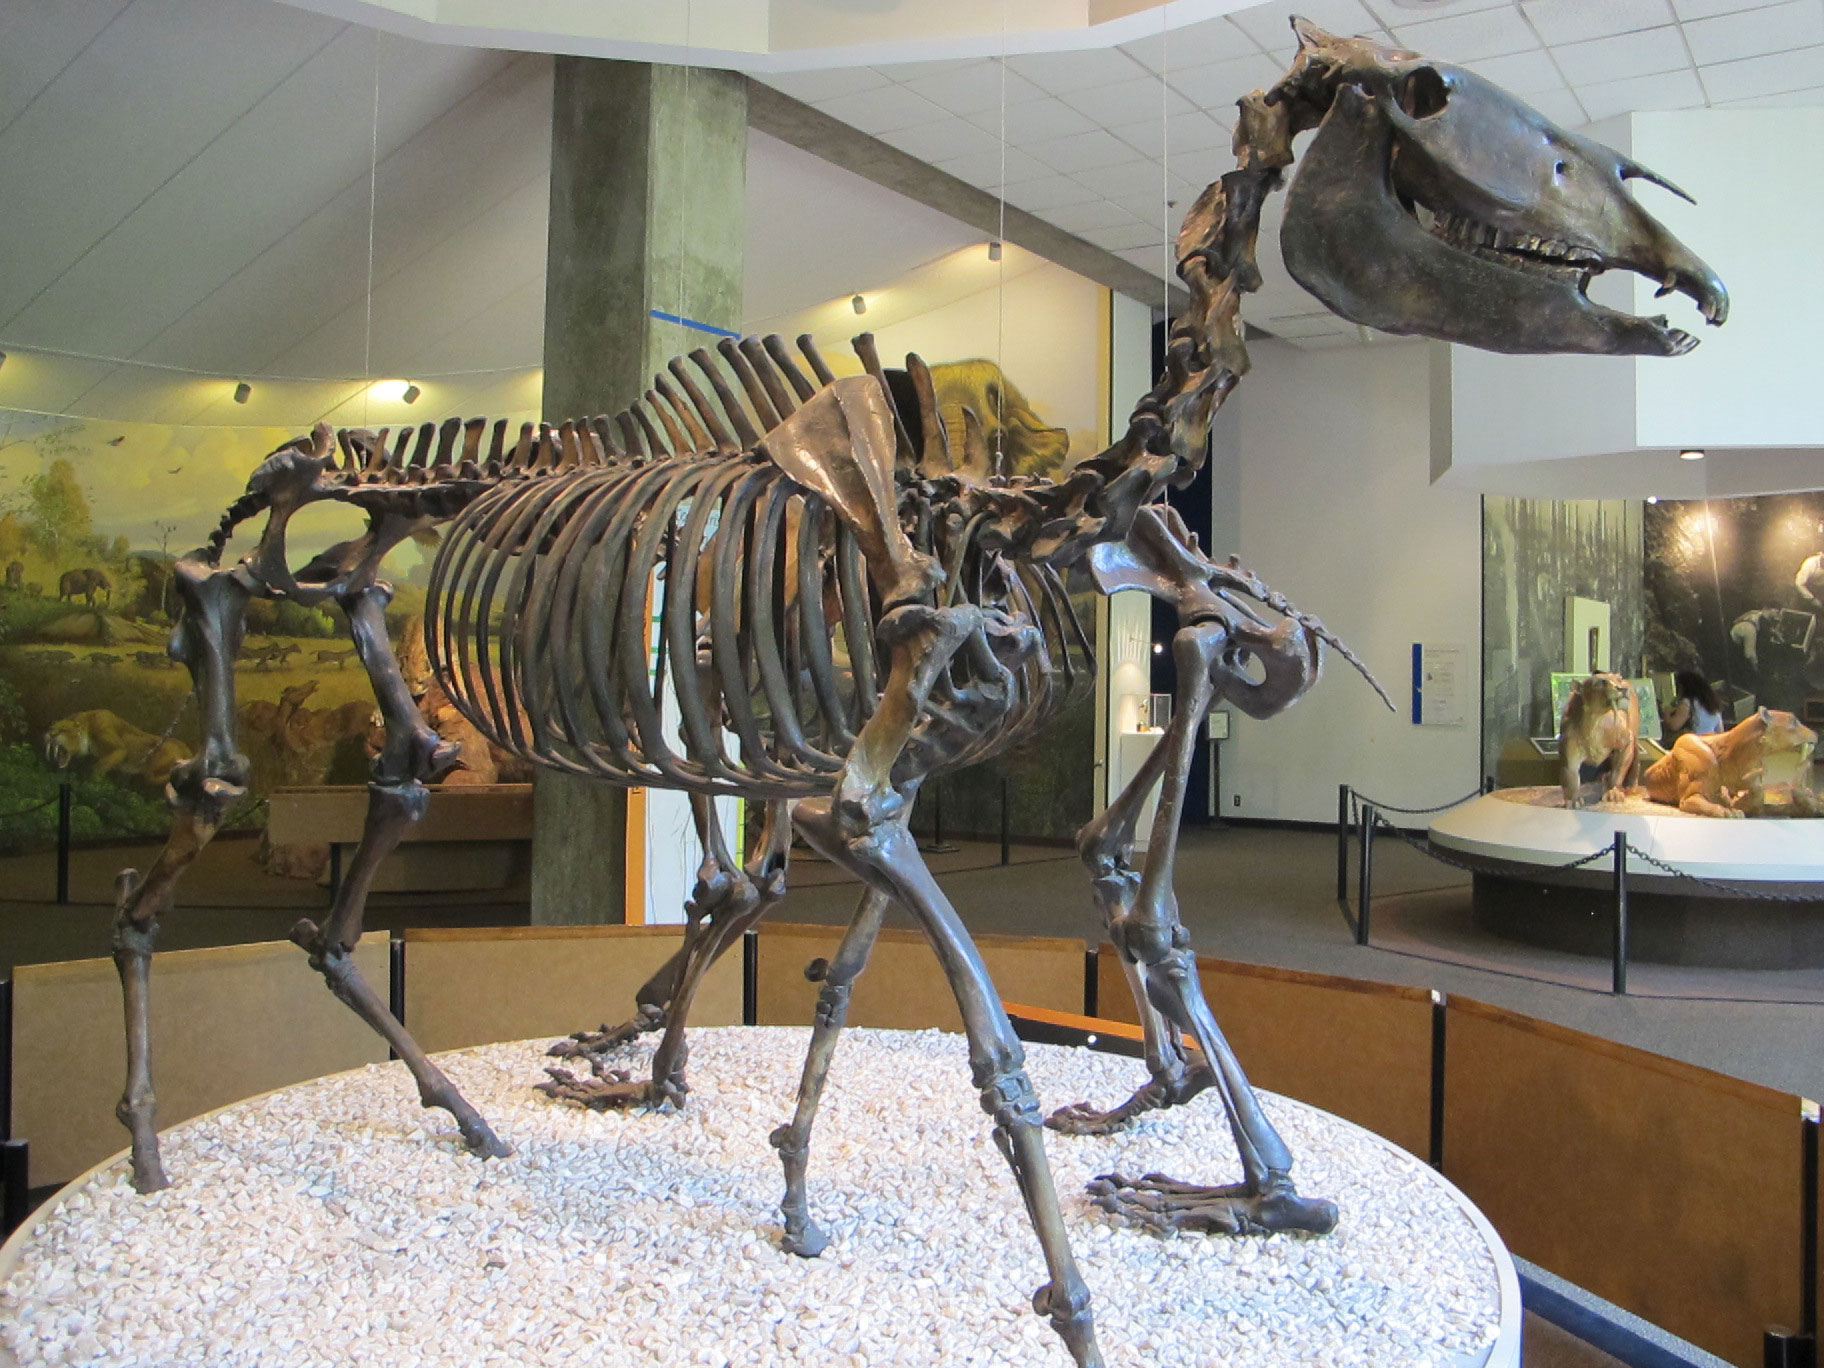 Photograph of the mounted skeleton of the ancient horse Equus occidentalis. The skeleton of this horse looks similar to the skeleton of a modern horse.